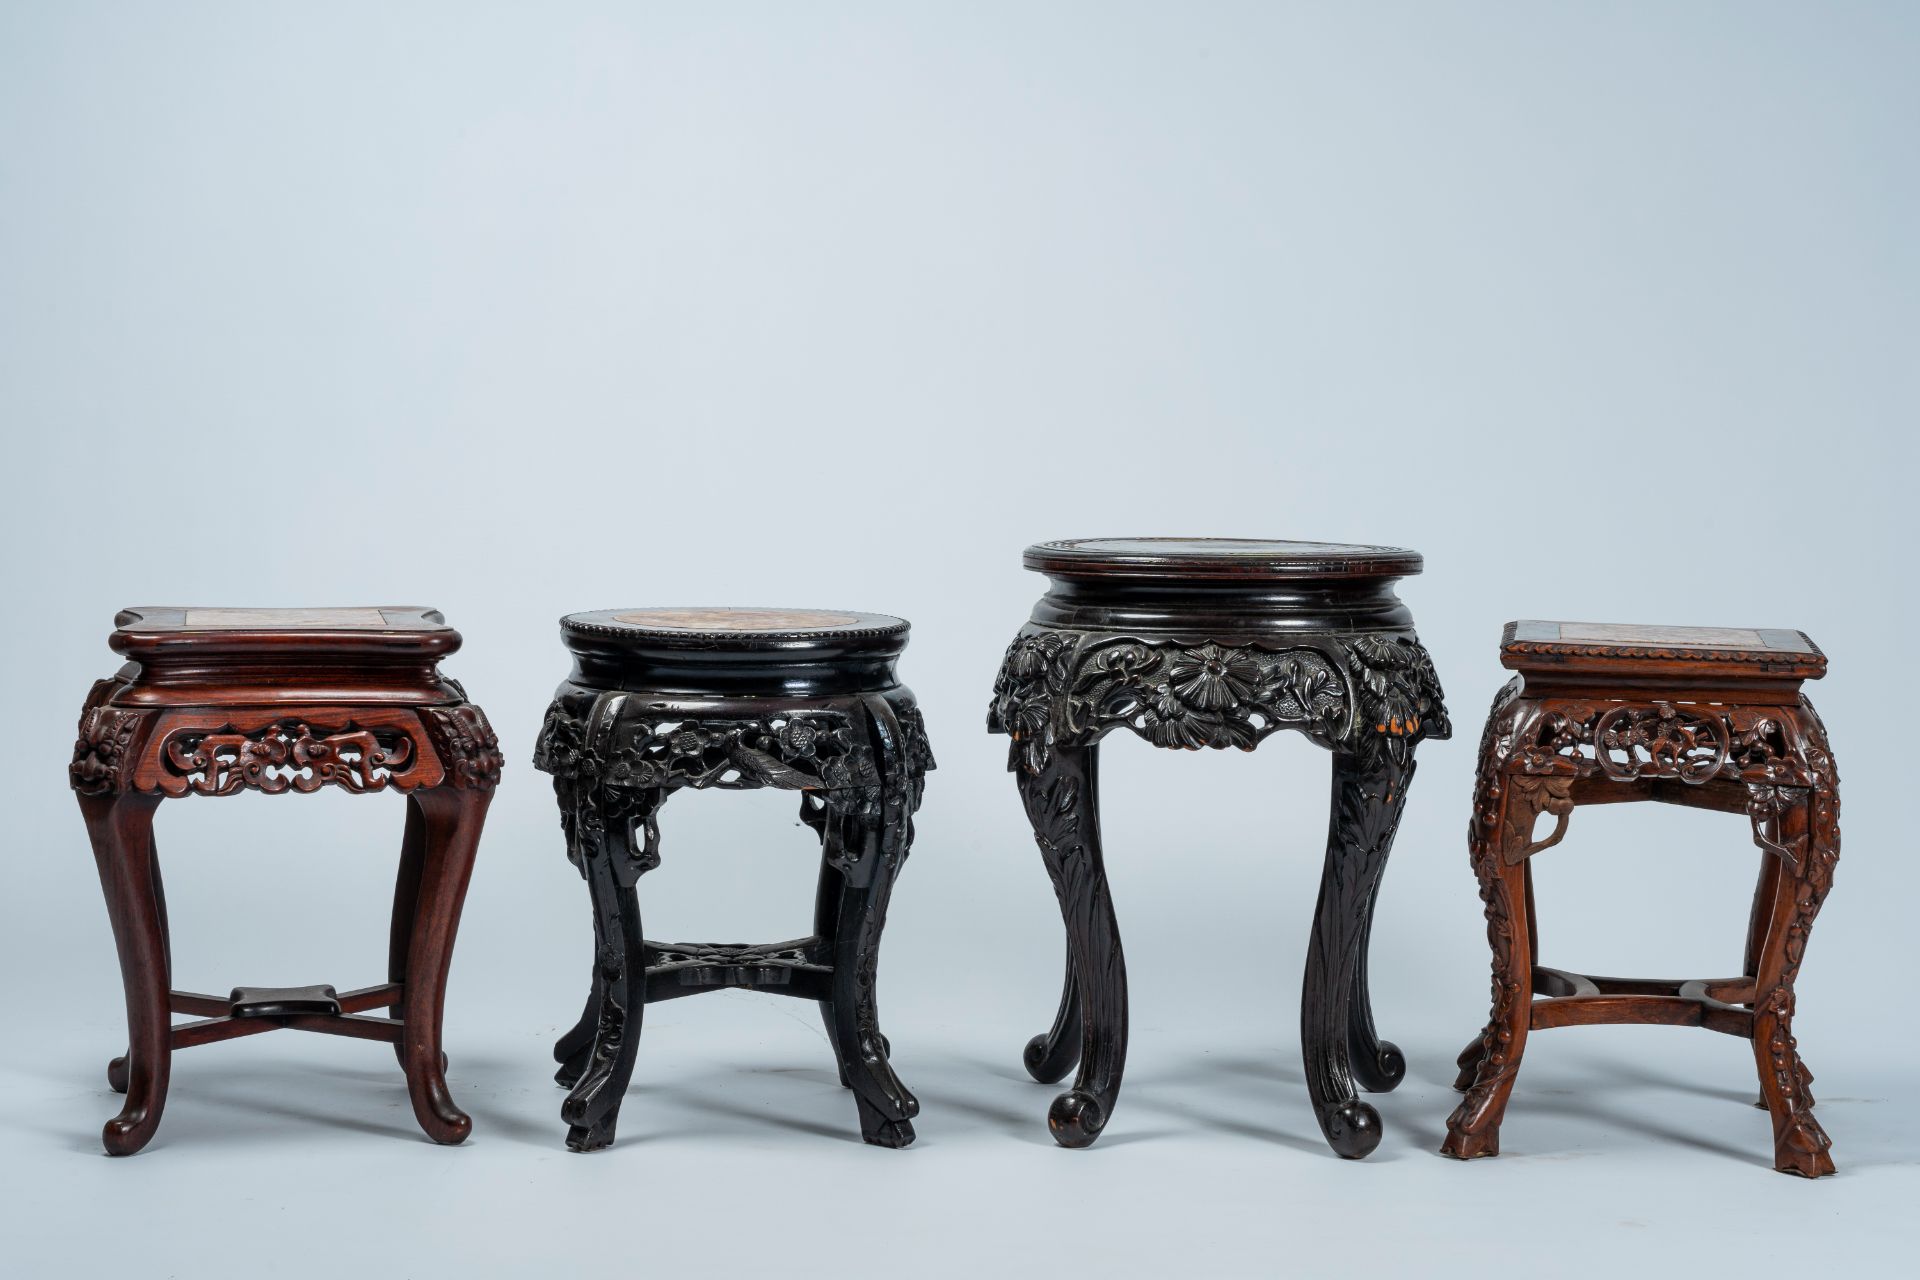 Four Chinese and Japanese open worked carved wood stands with marble and wood top, 20th C. - Image 5 of 7